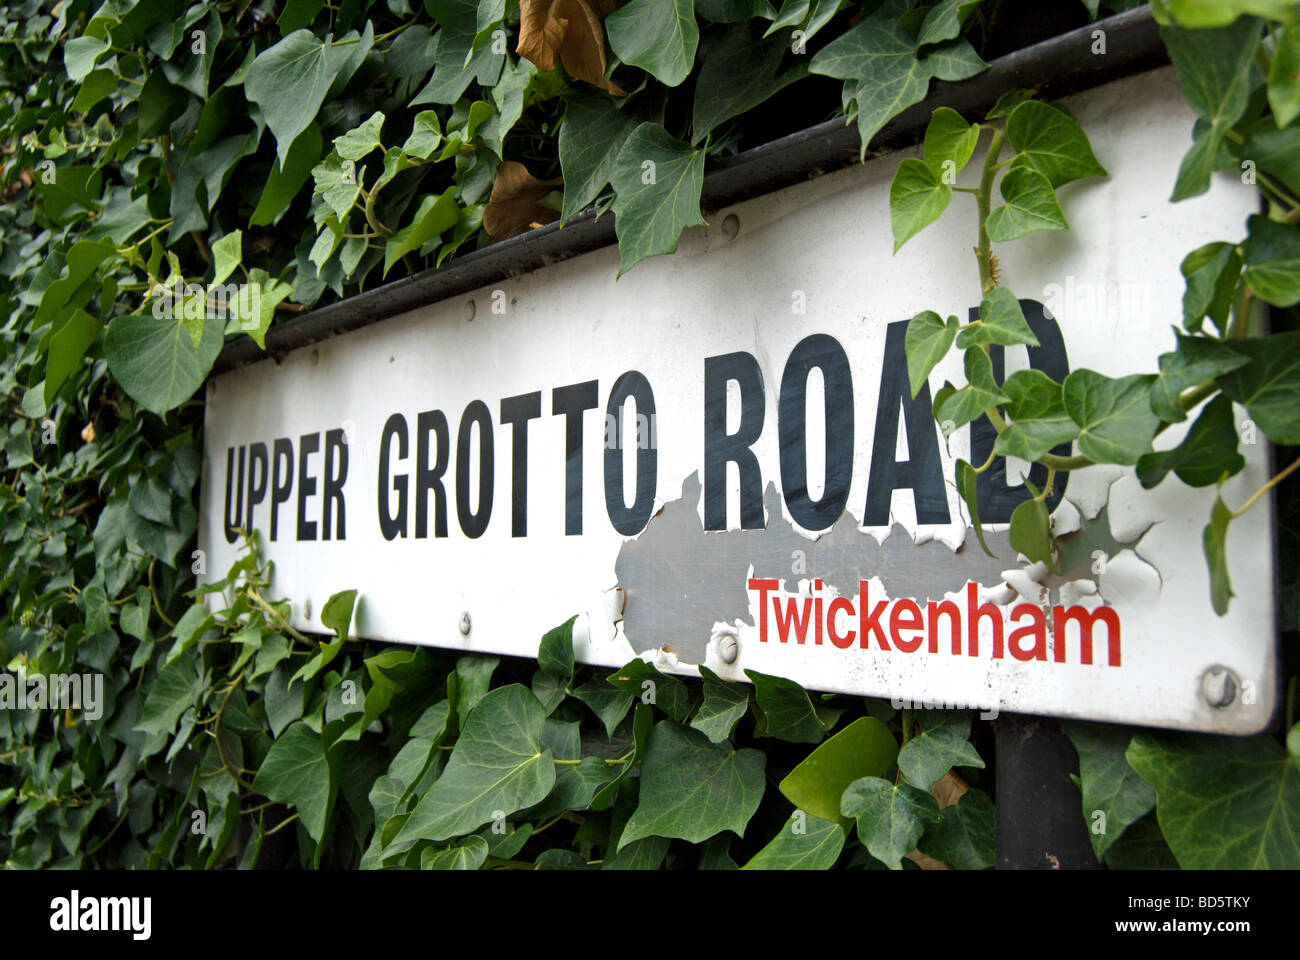 upper grotto road, named after the grotto of 18th century writer and local resident alexander pope, twickenham, england Stock Photo